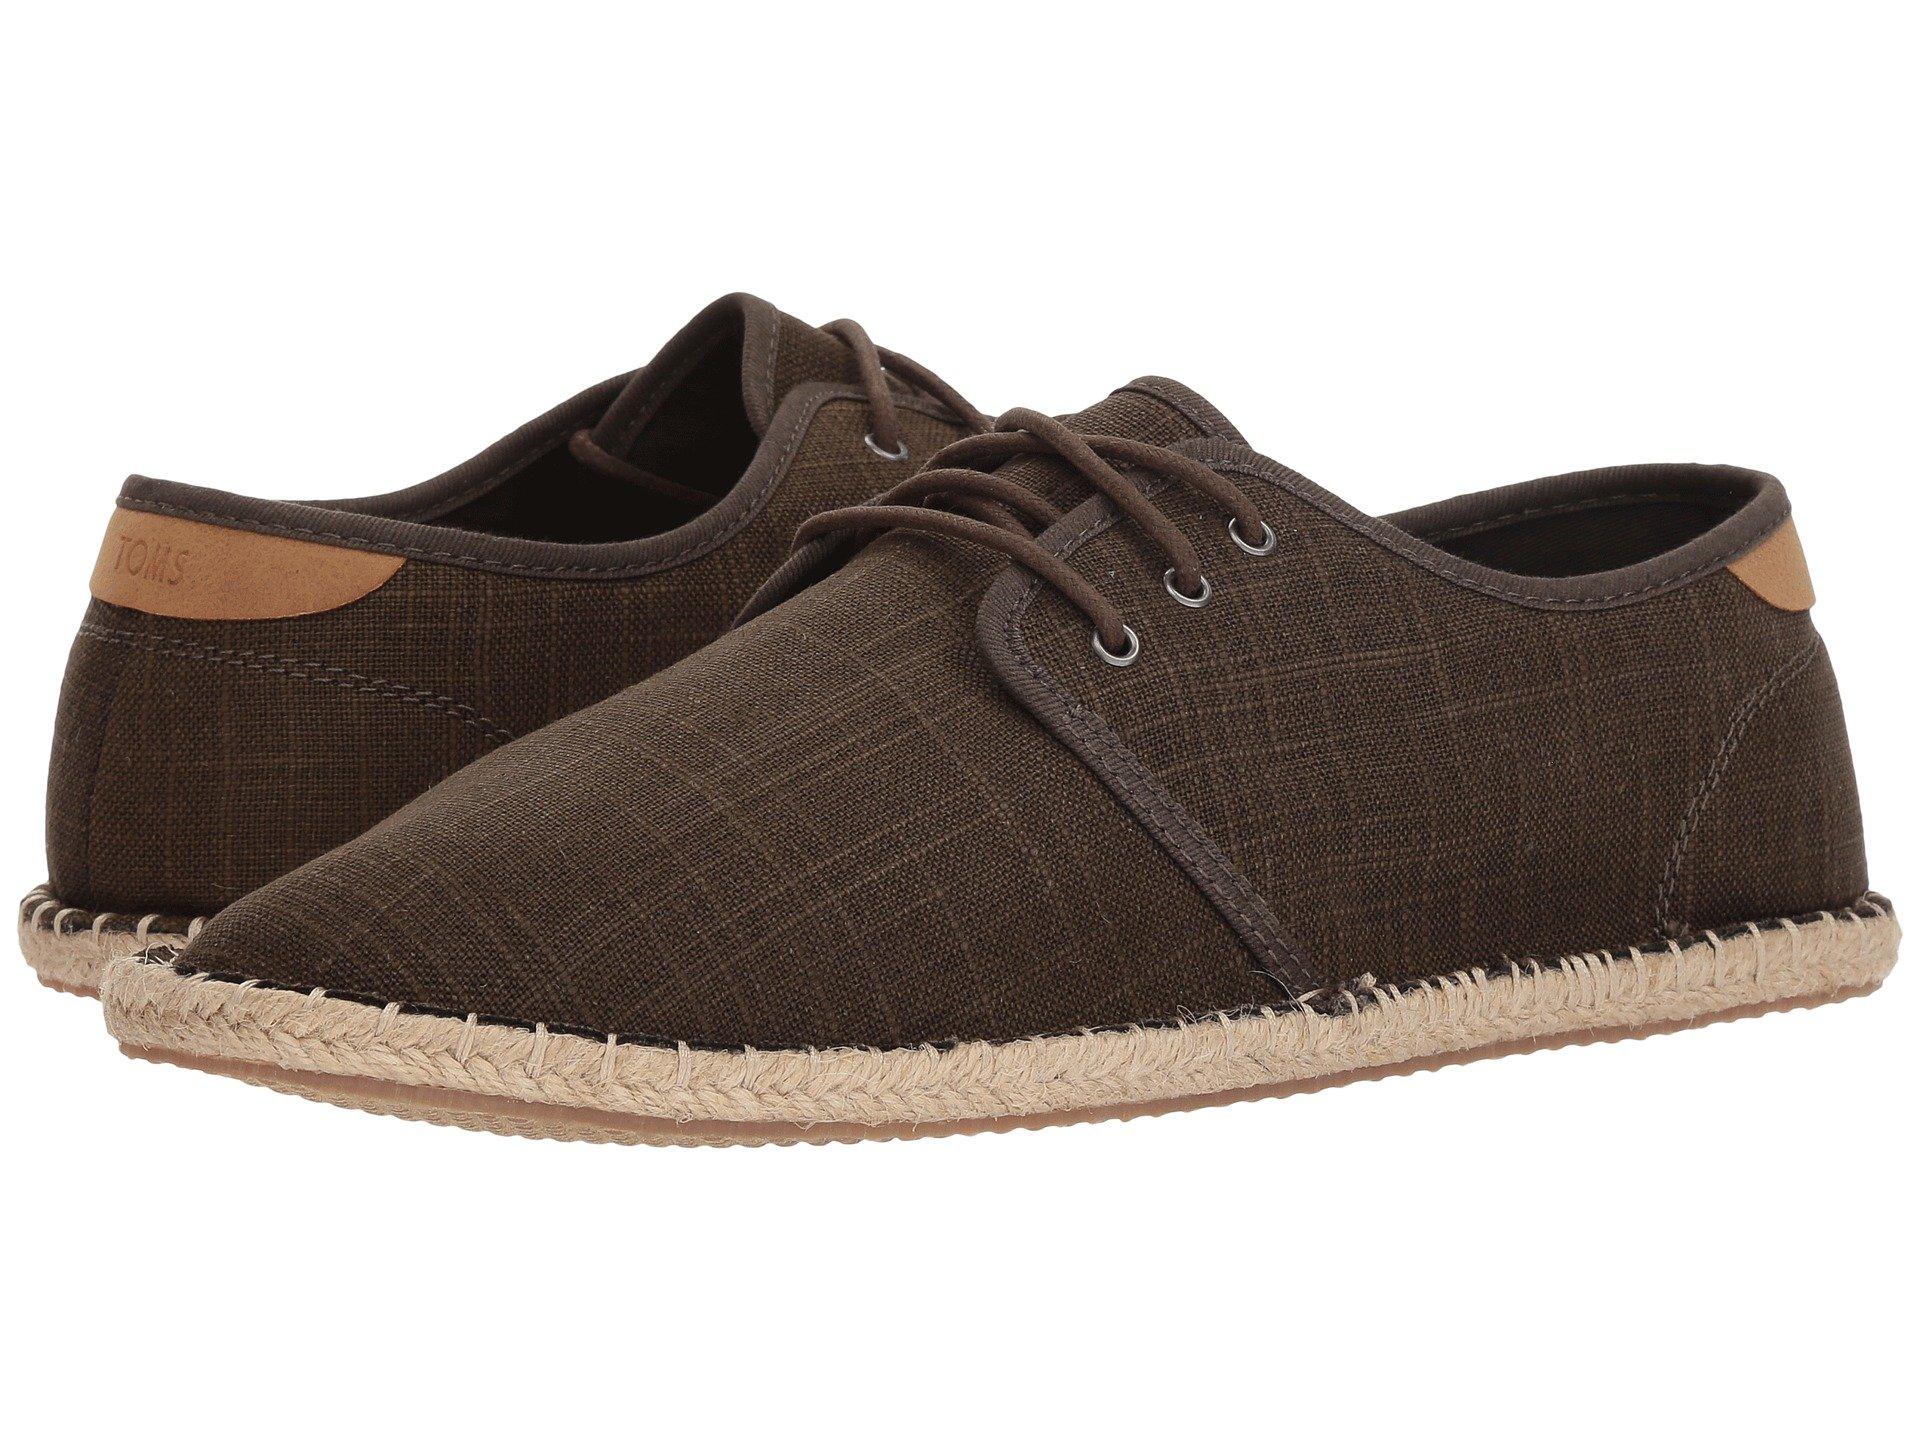 TOMS Suede Diego in Brown for Men - Lyst